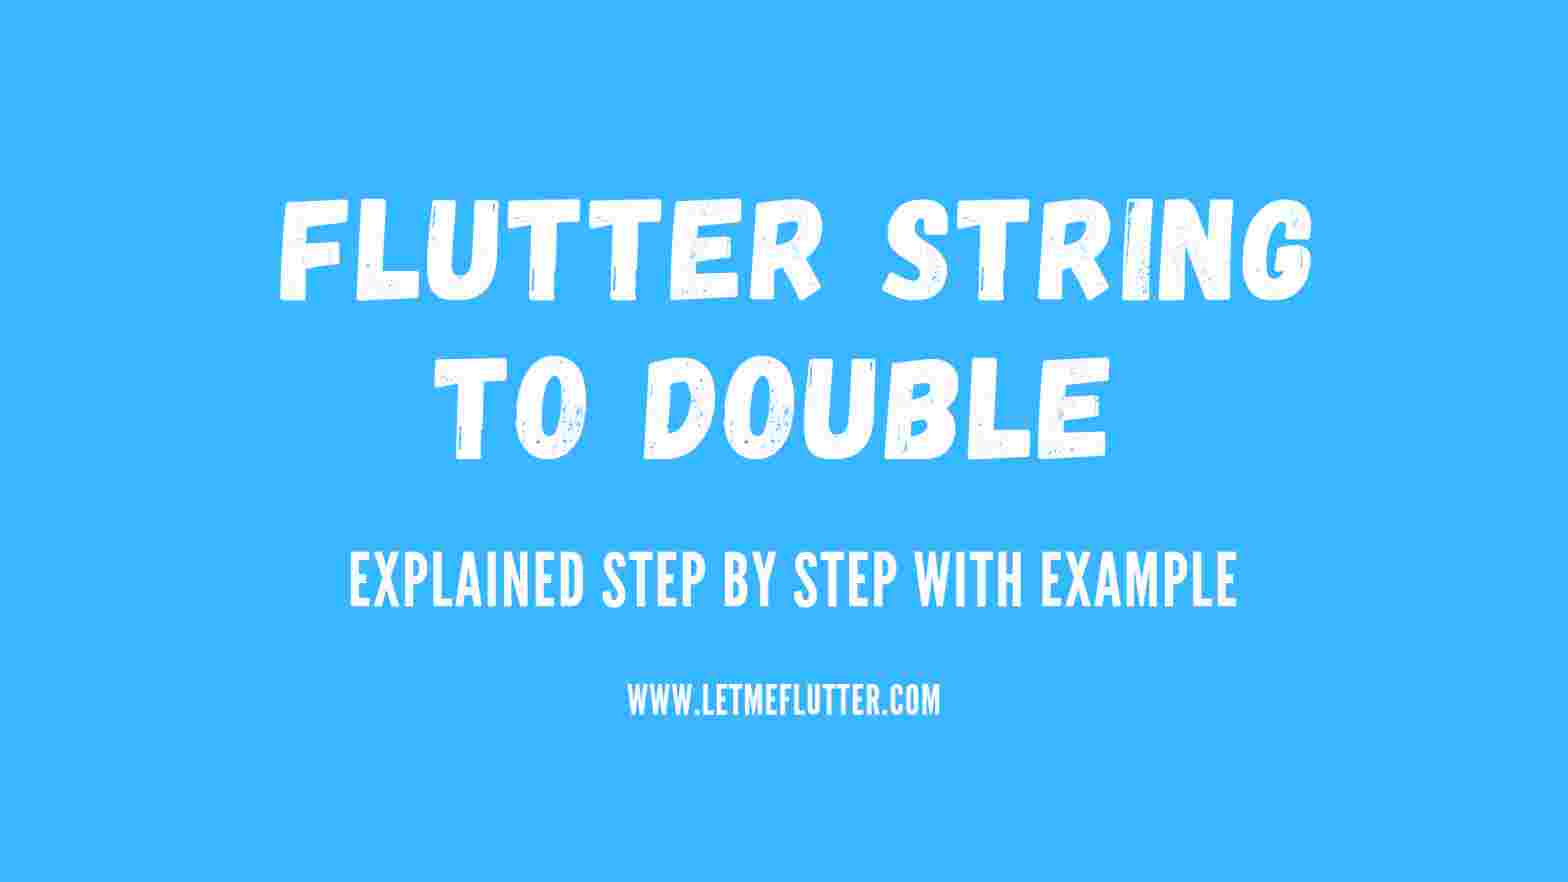 Flutter string to double